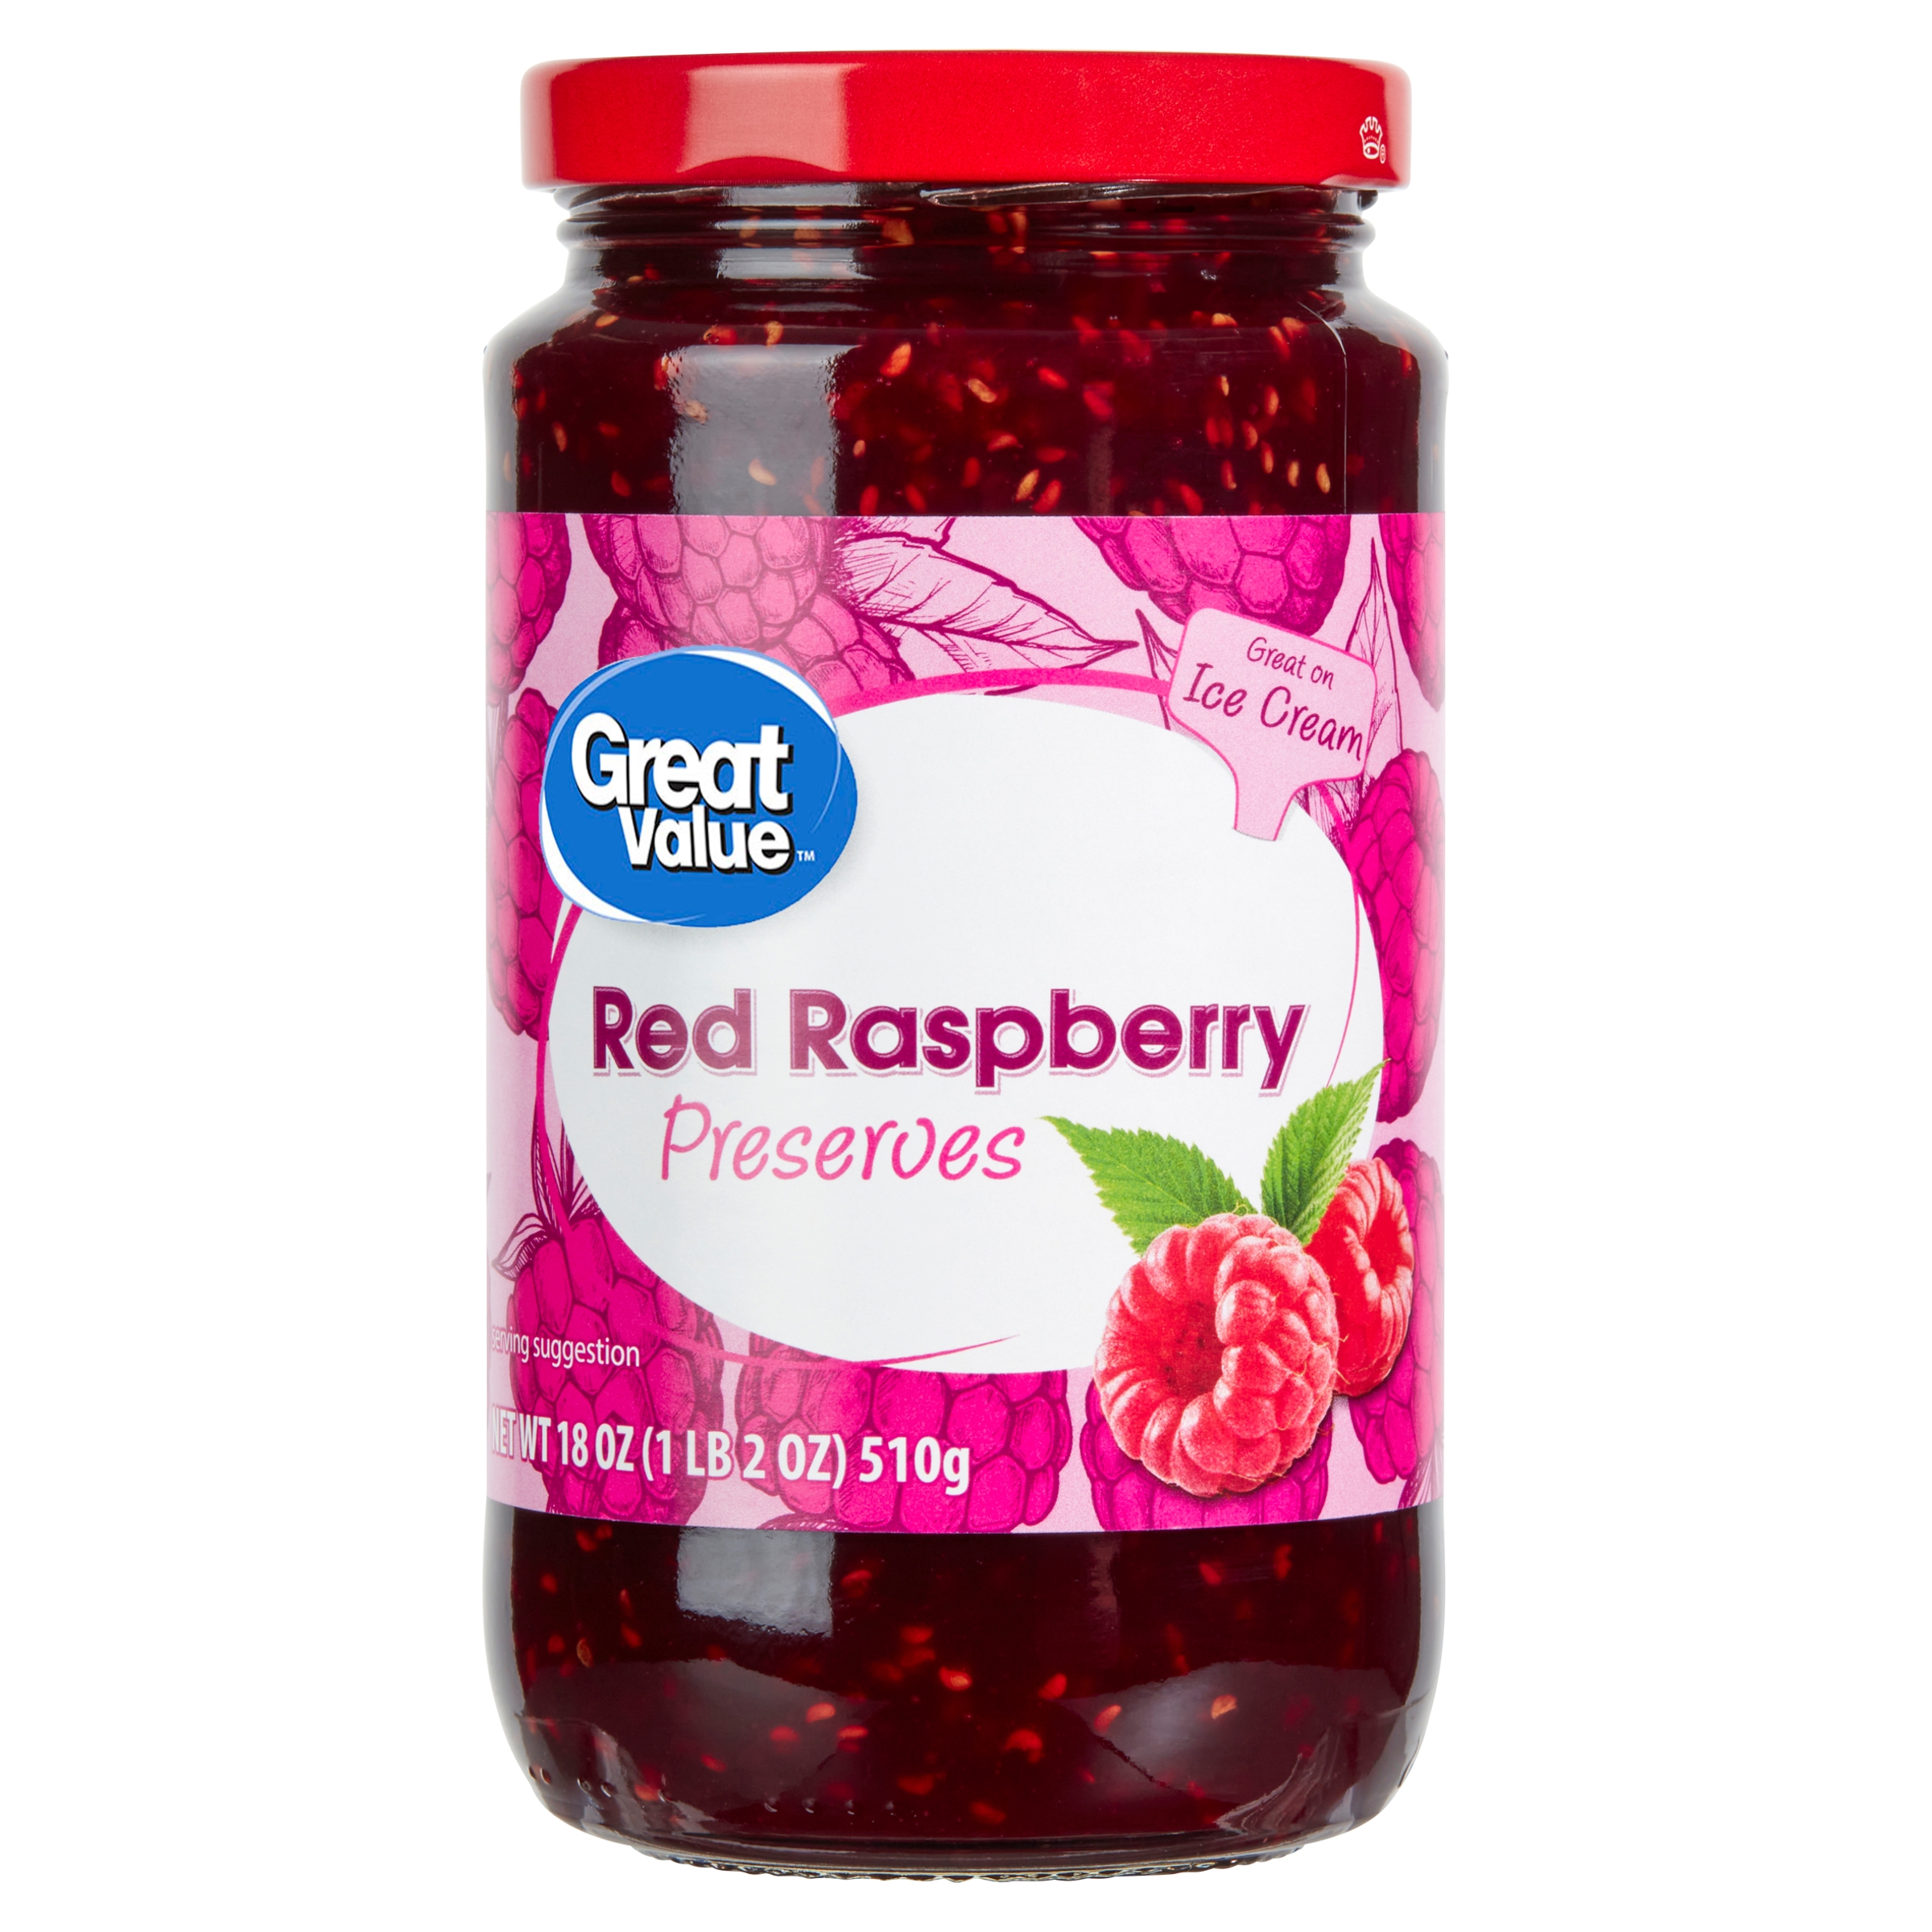 Great Value Red Raspberry Preserves, 18 oz - image 1 of 7